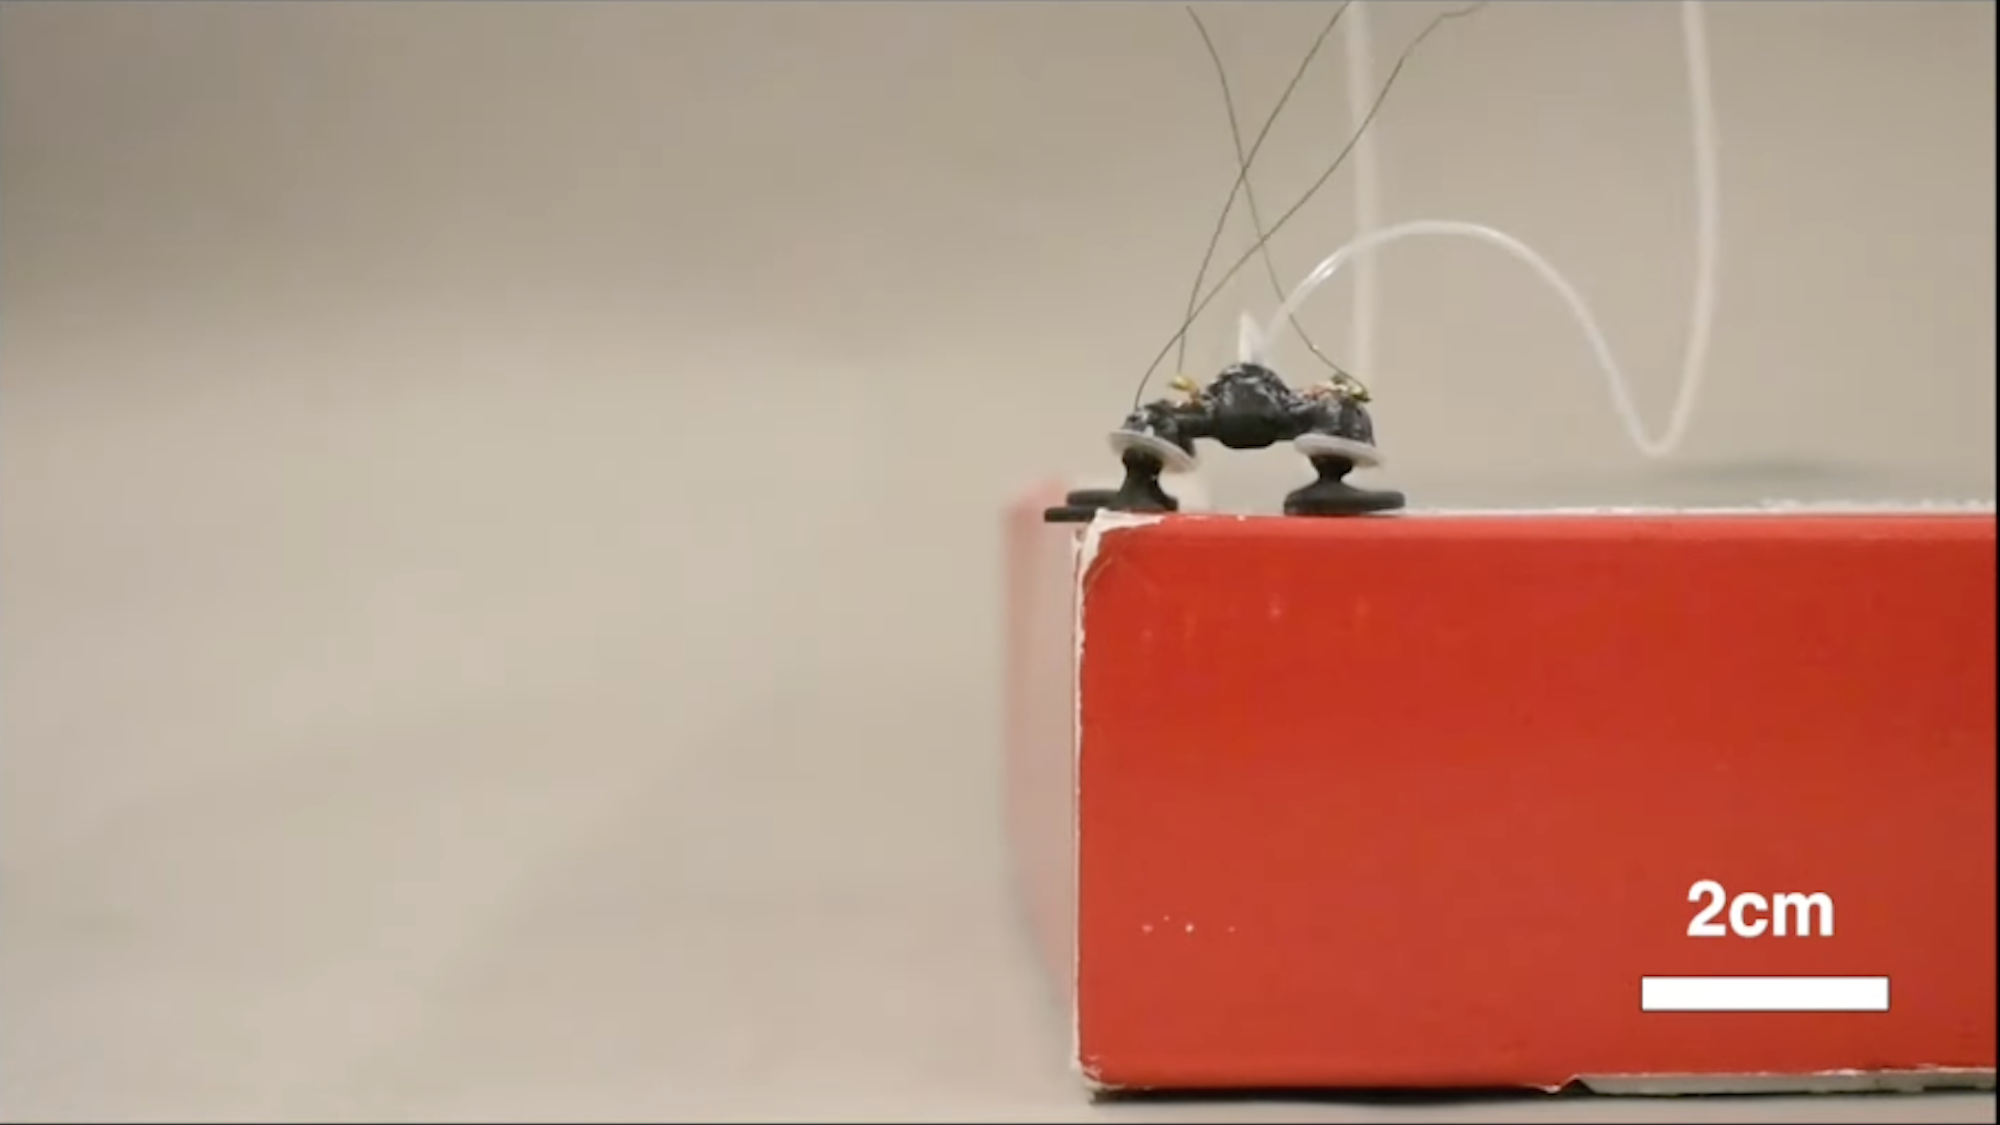 Mini explosions give this little robot a big bounce